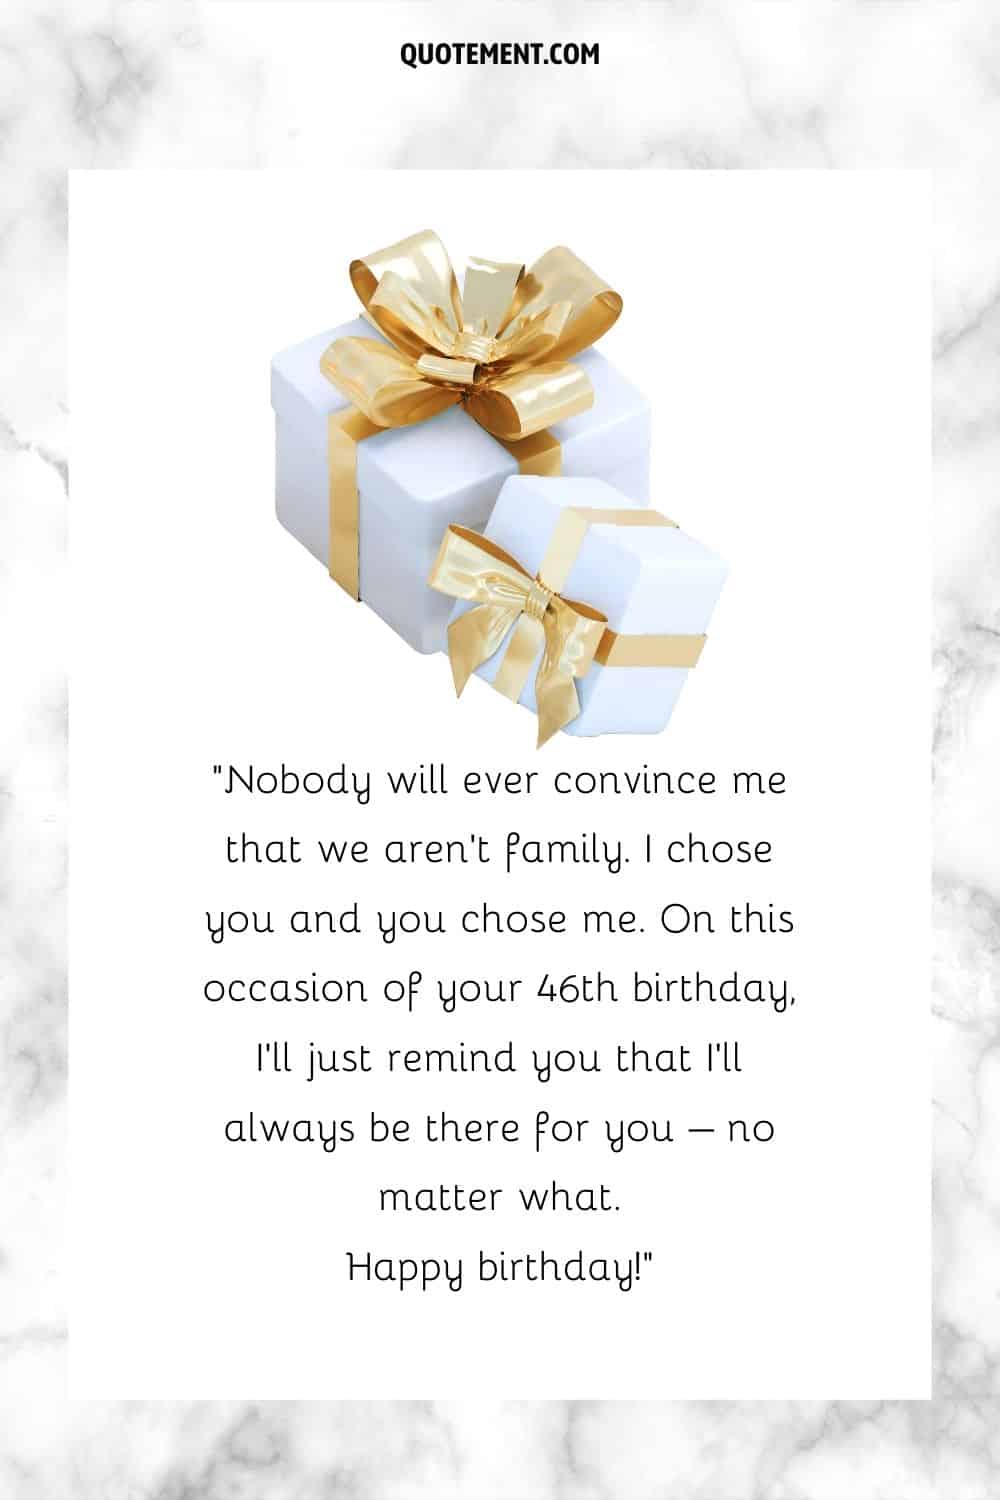 Message for a friend's 46th birthday and gifts.